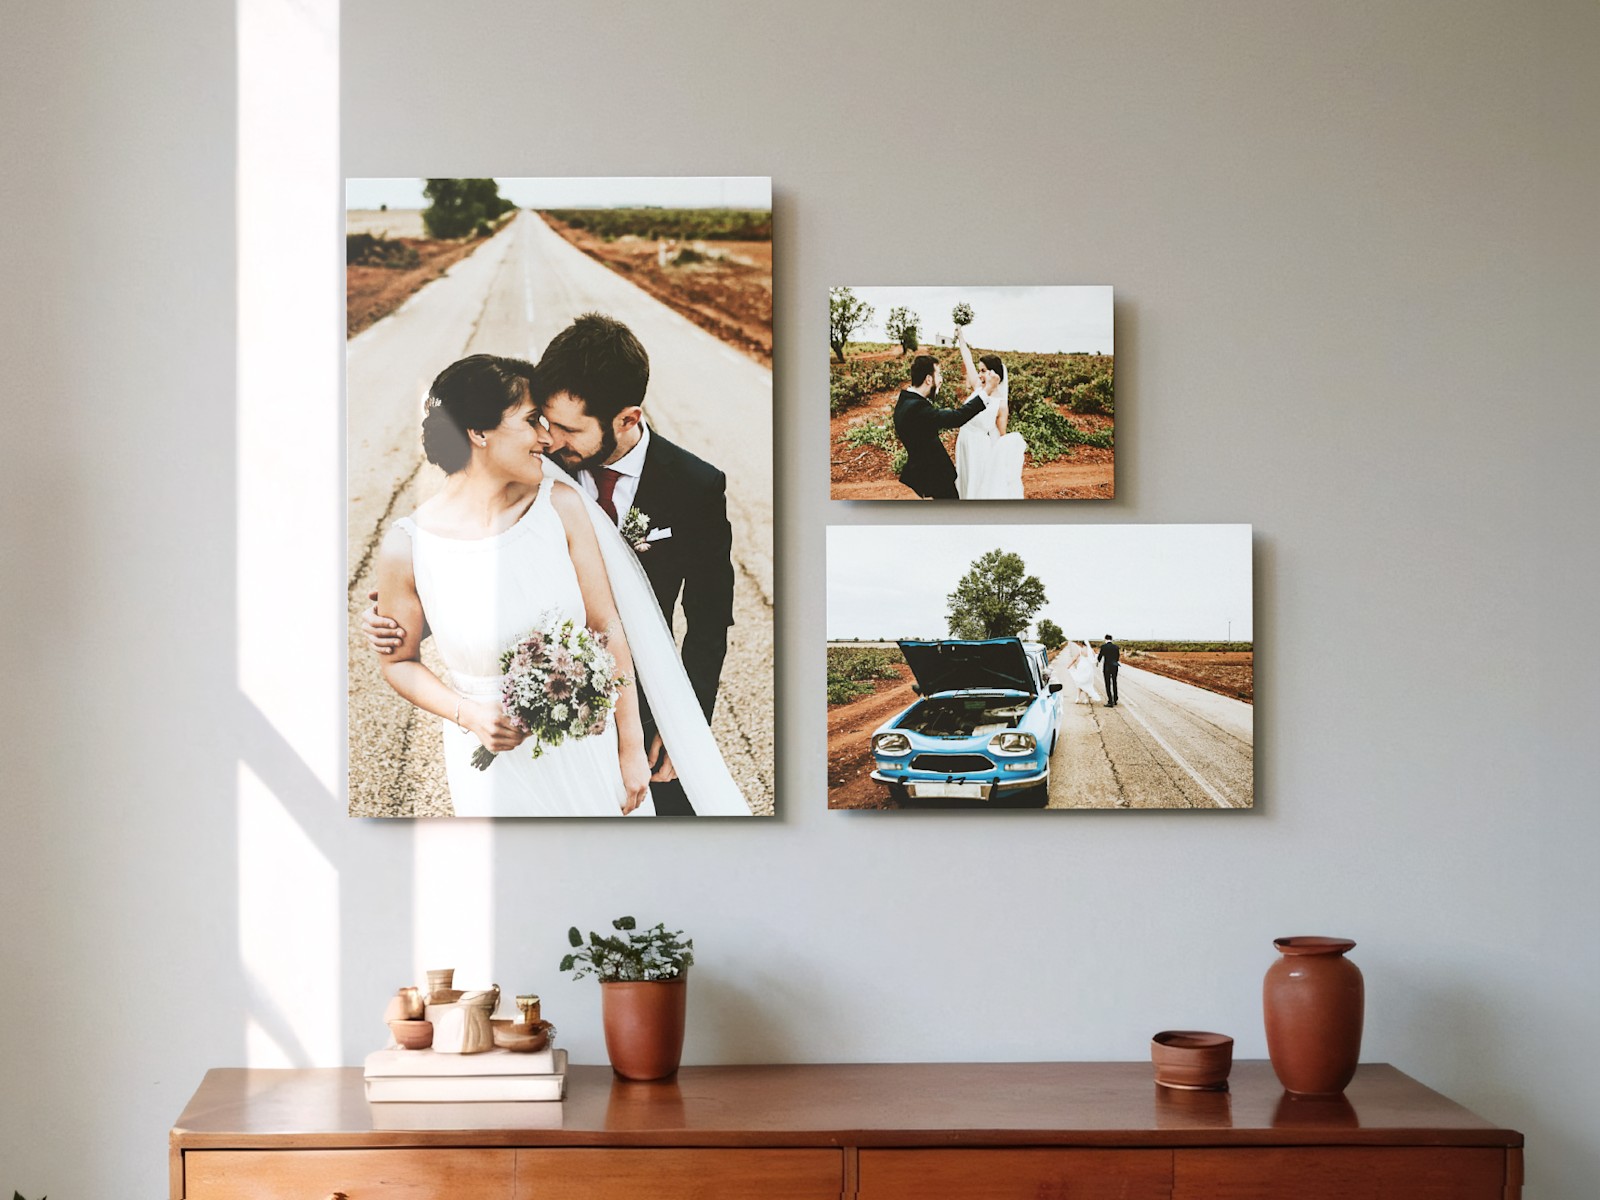 Larger version: Three aluminium prints of different sizes, all featuring wedding photography.